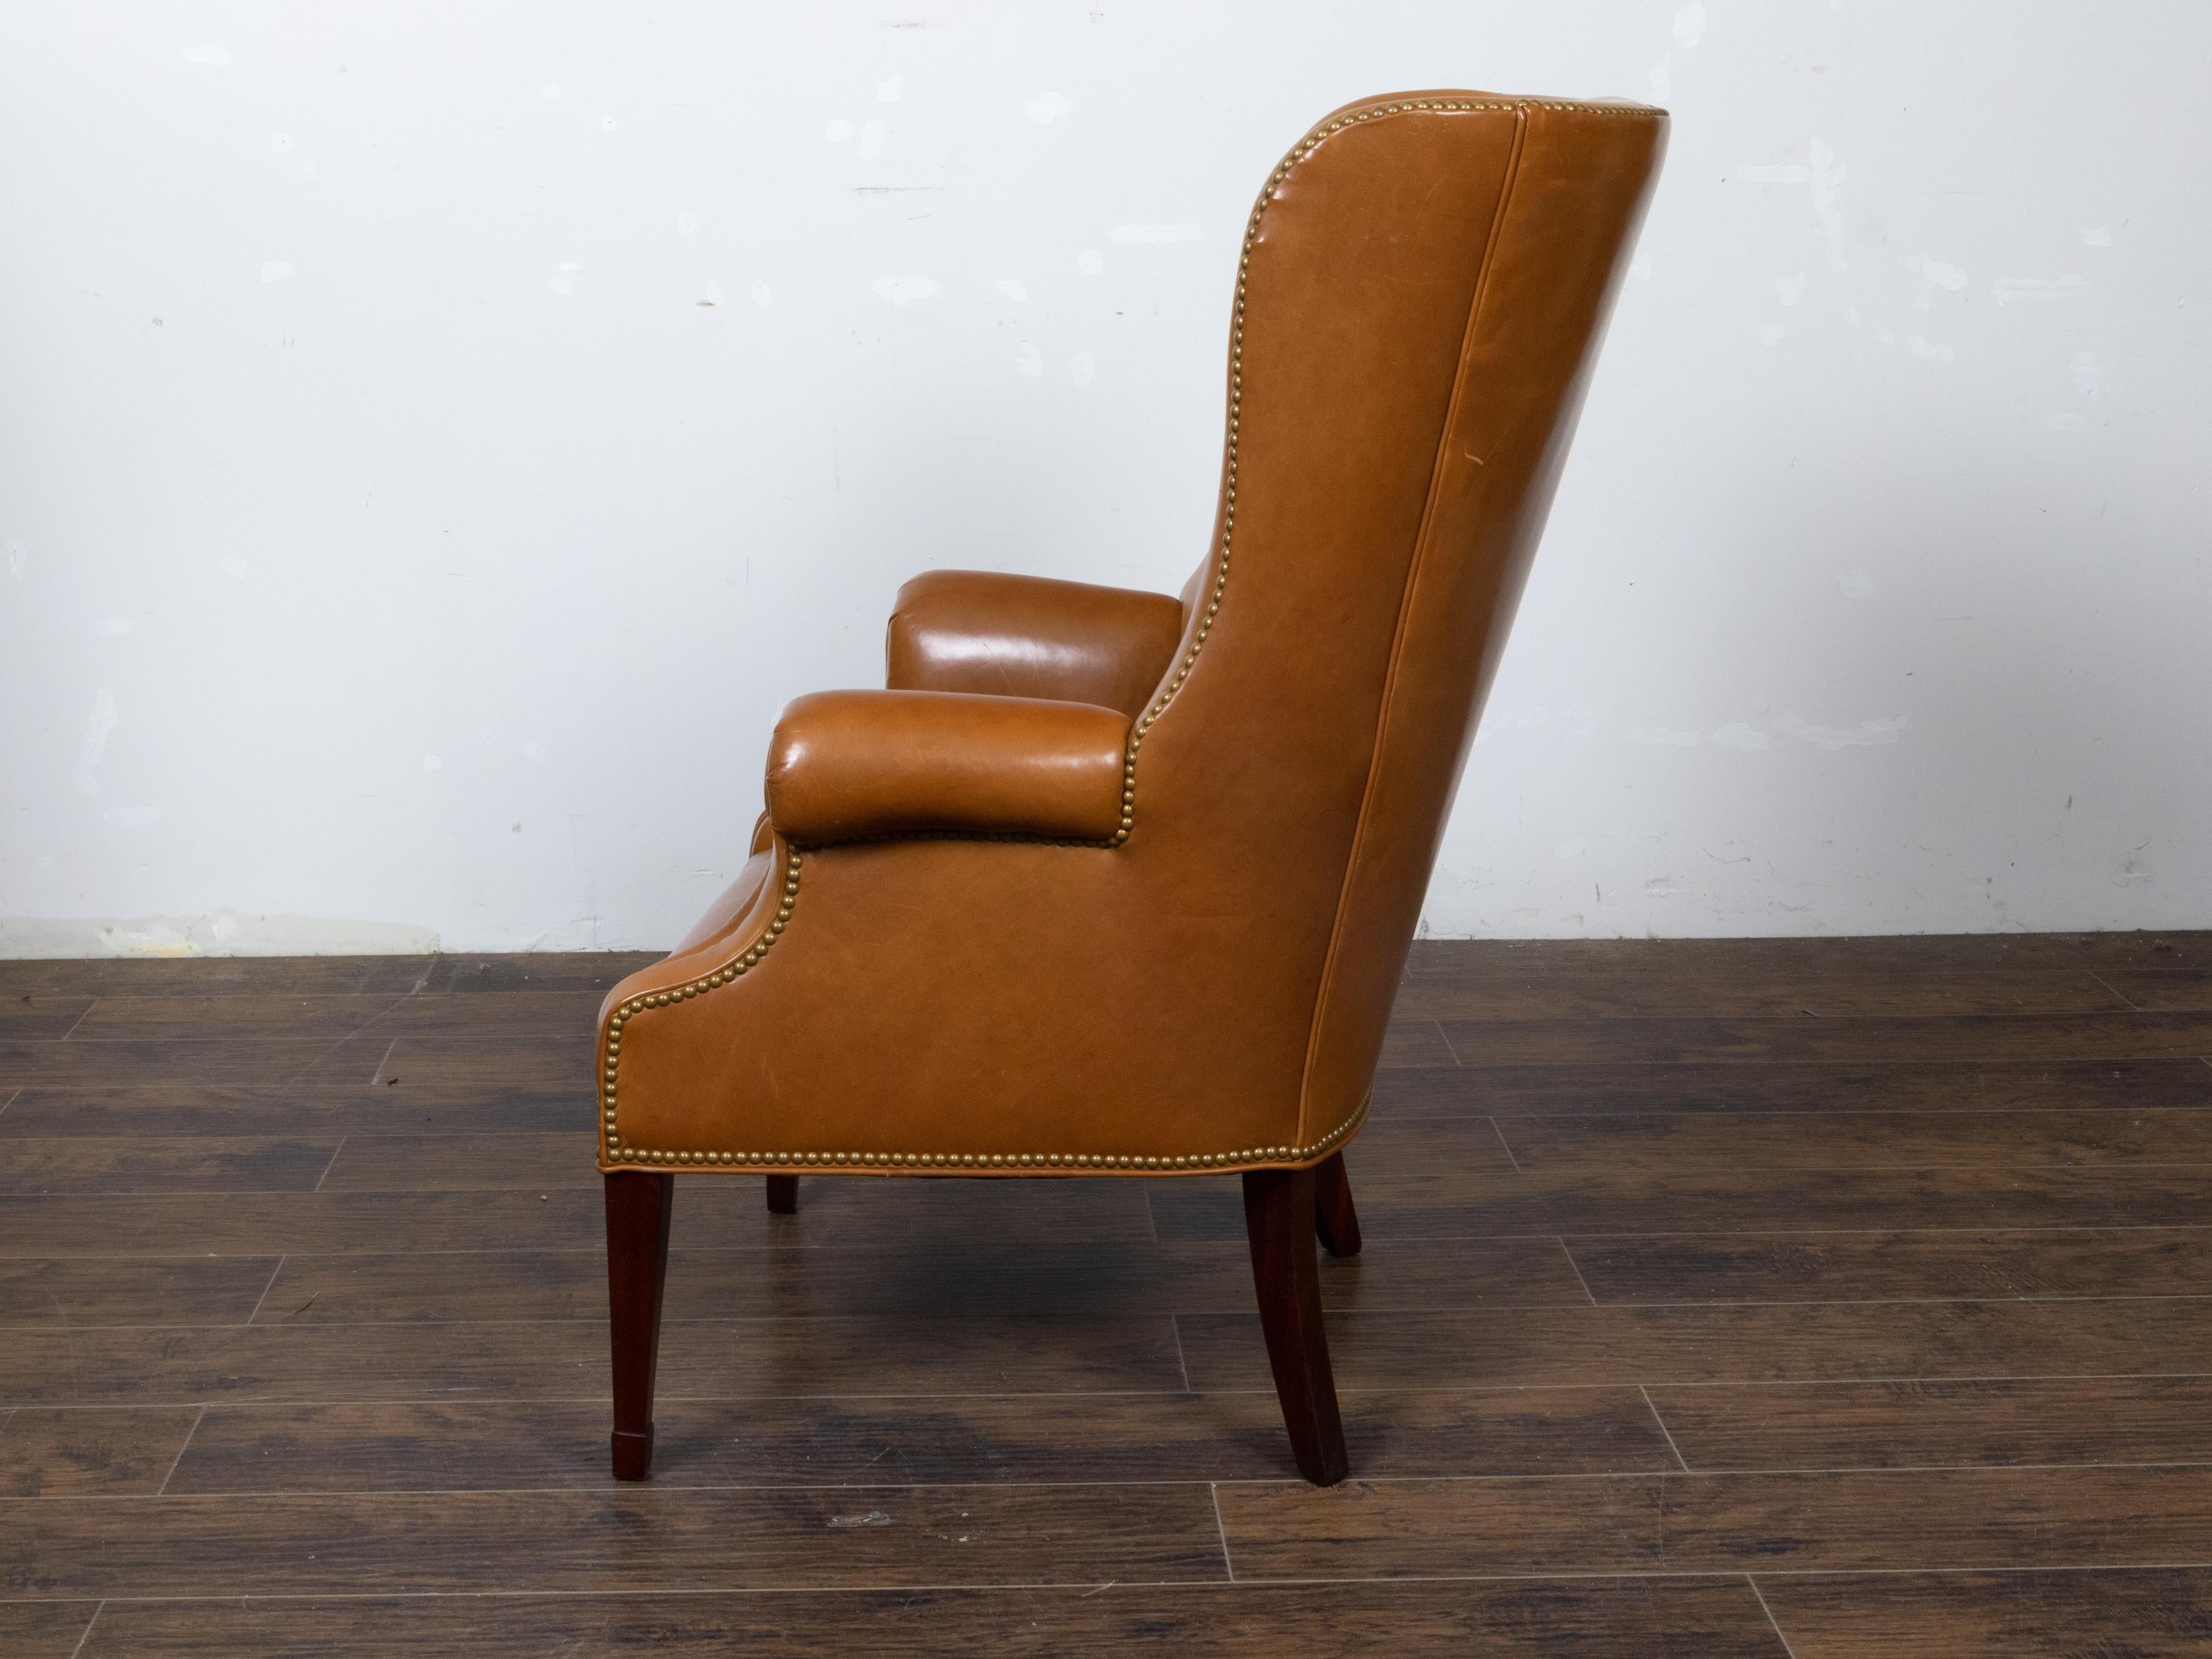 English Brown Leather Wingback Chair with Brass Nailhead Trim, circa 1930-1940 For Sale 2